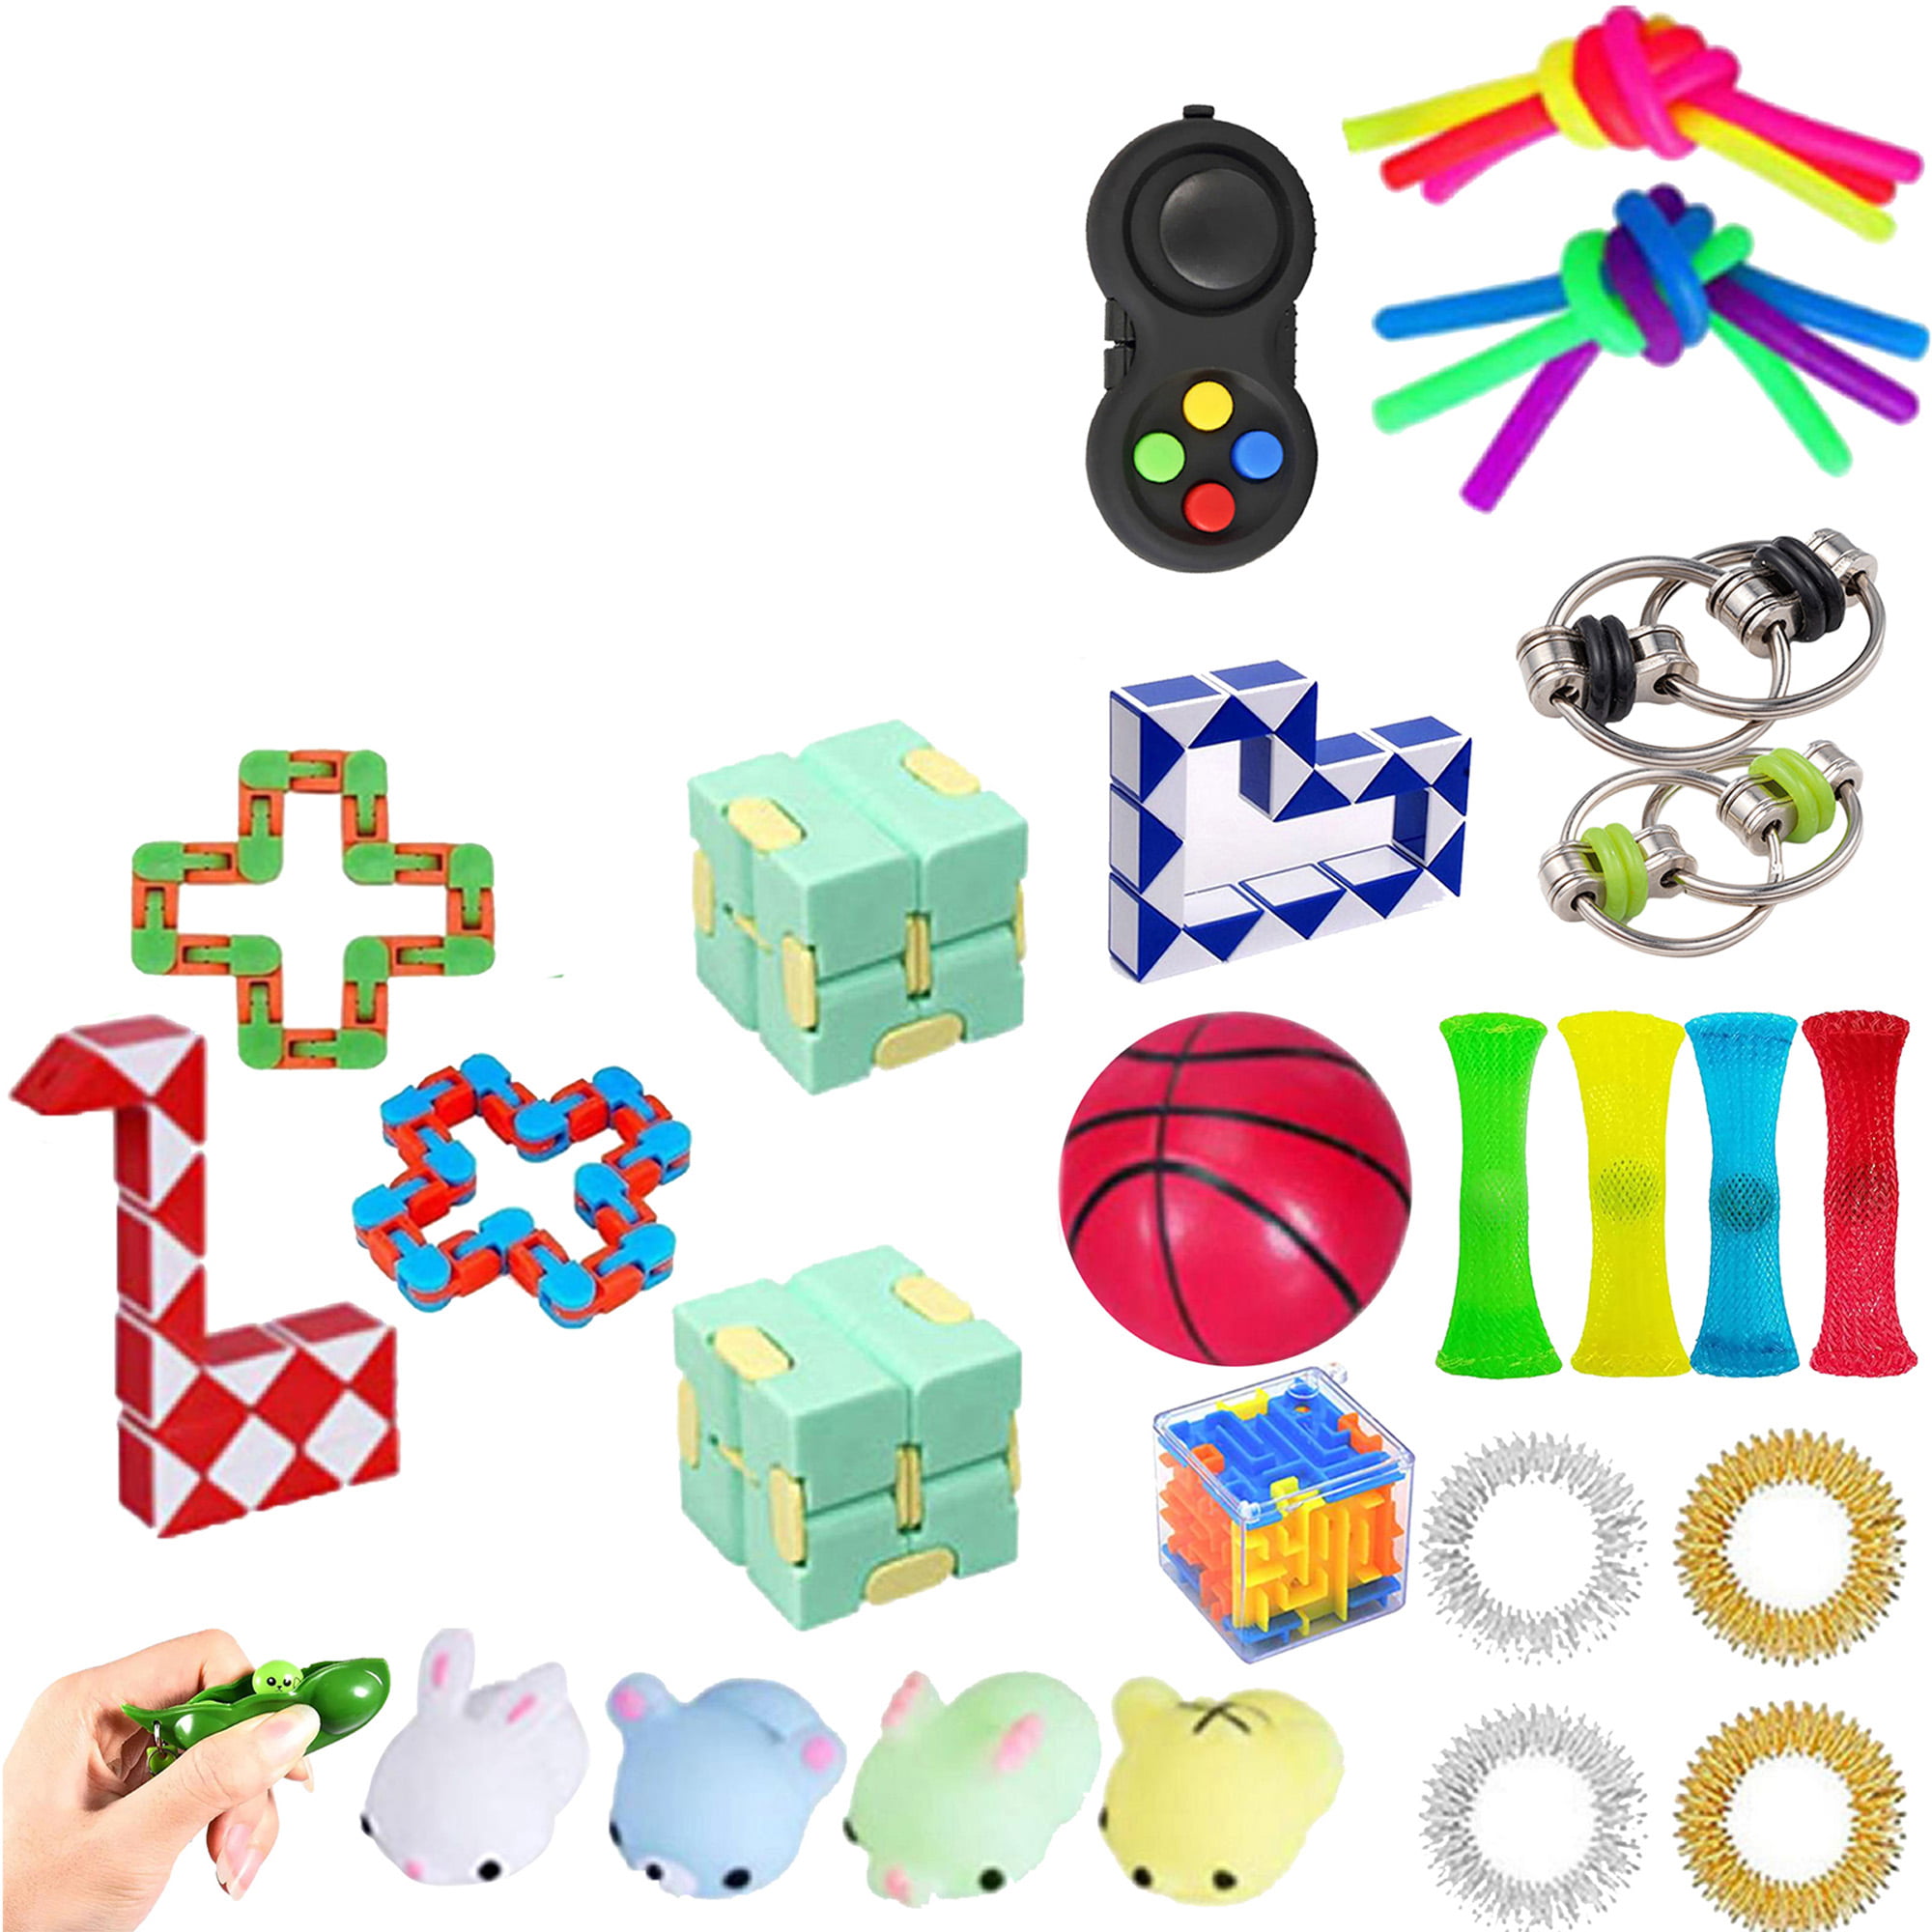 34 Pack Fidget Toys Set Pop-it Dimple Figet Toys for Kids and Adults with Colorful Pineapple Push Bubble Sensory Fidget Toys Pack Stress Relief and Anti-Anxiety Tools 23Pcs Dimple Digit-A 